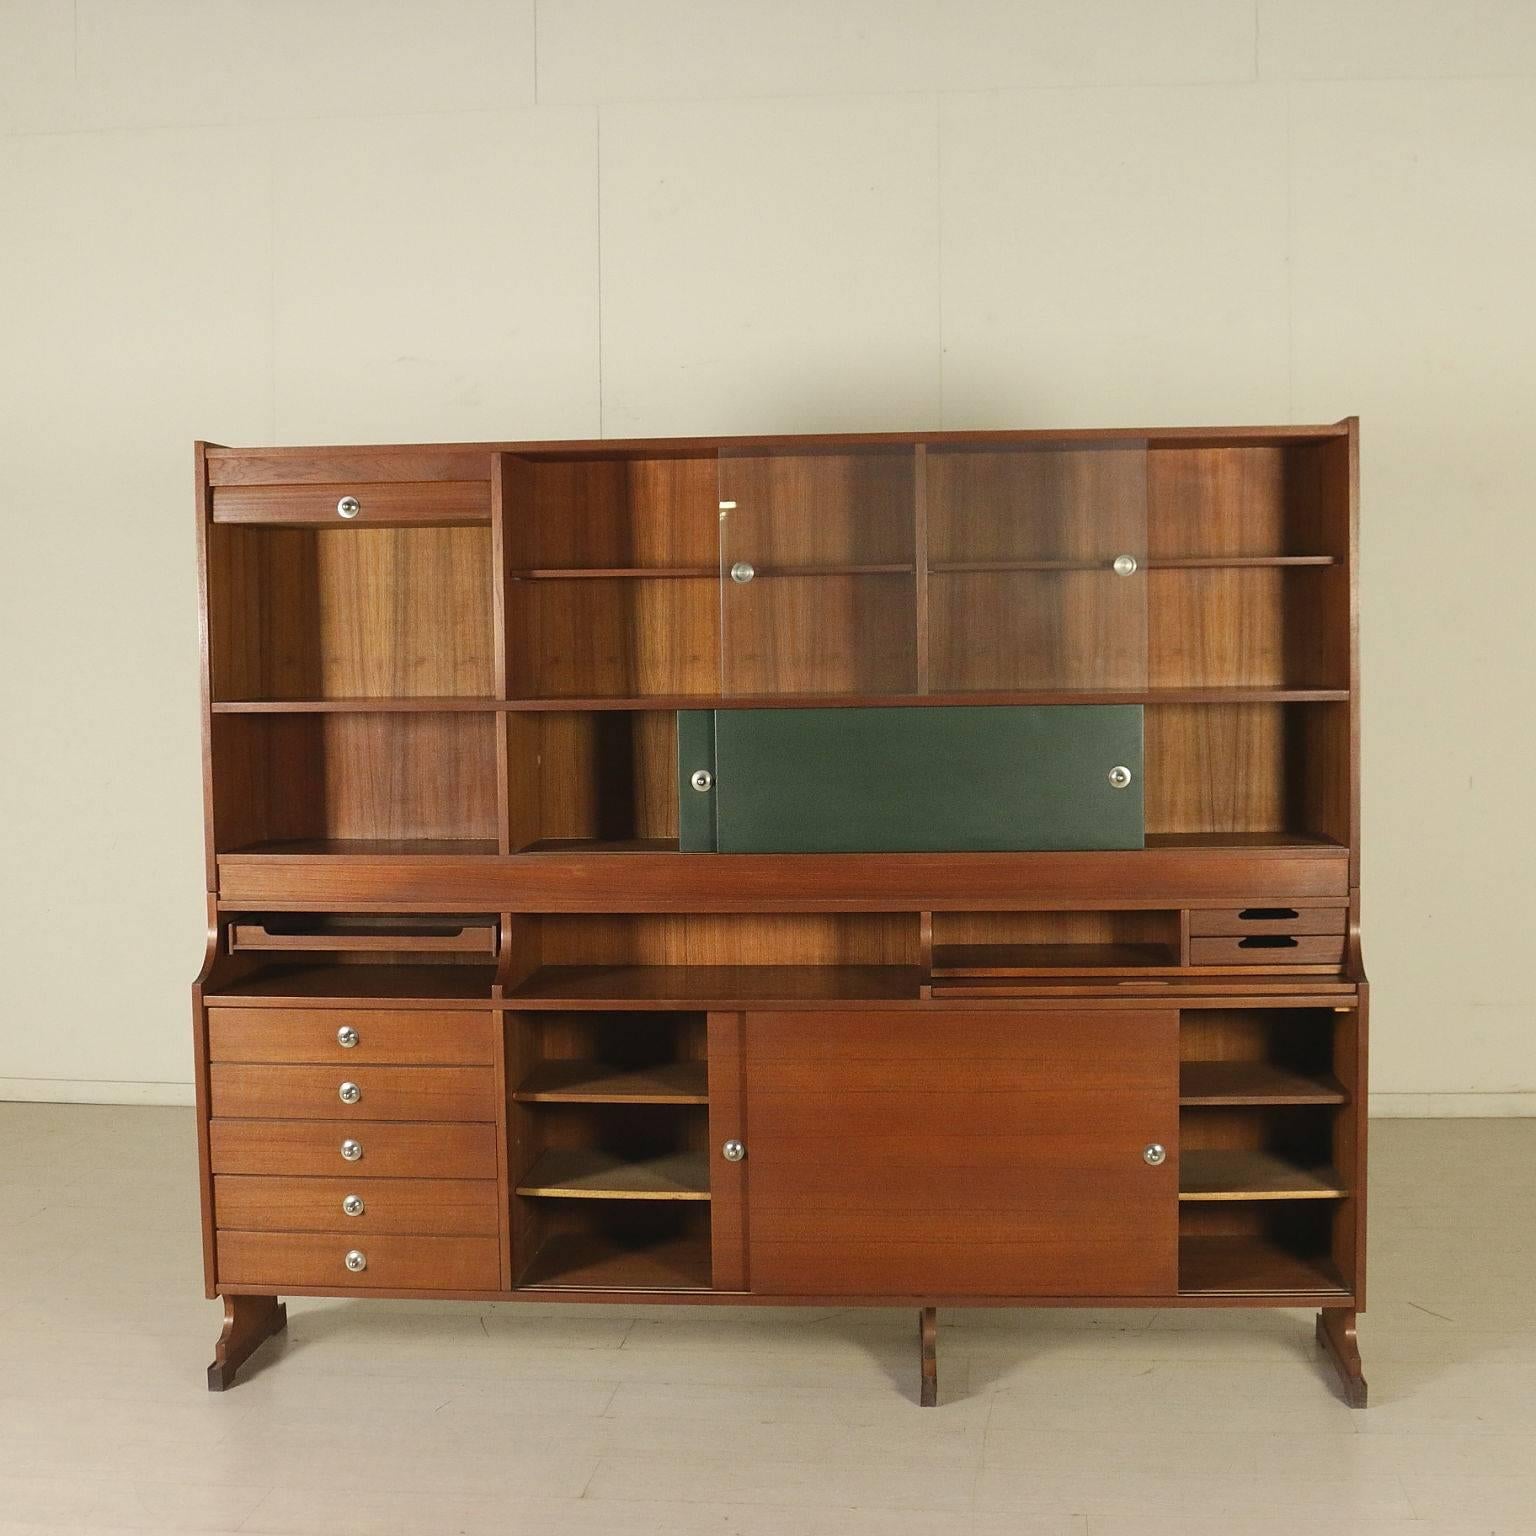 A cabinet with raised top and sliding doors, drawers and extractable writing top. Teak veneered wood, glass, leatherette upholstery. Manufactured in Italy, 1960s.